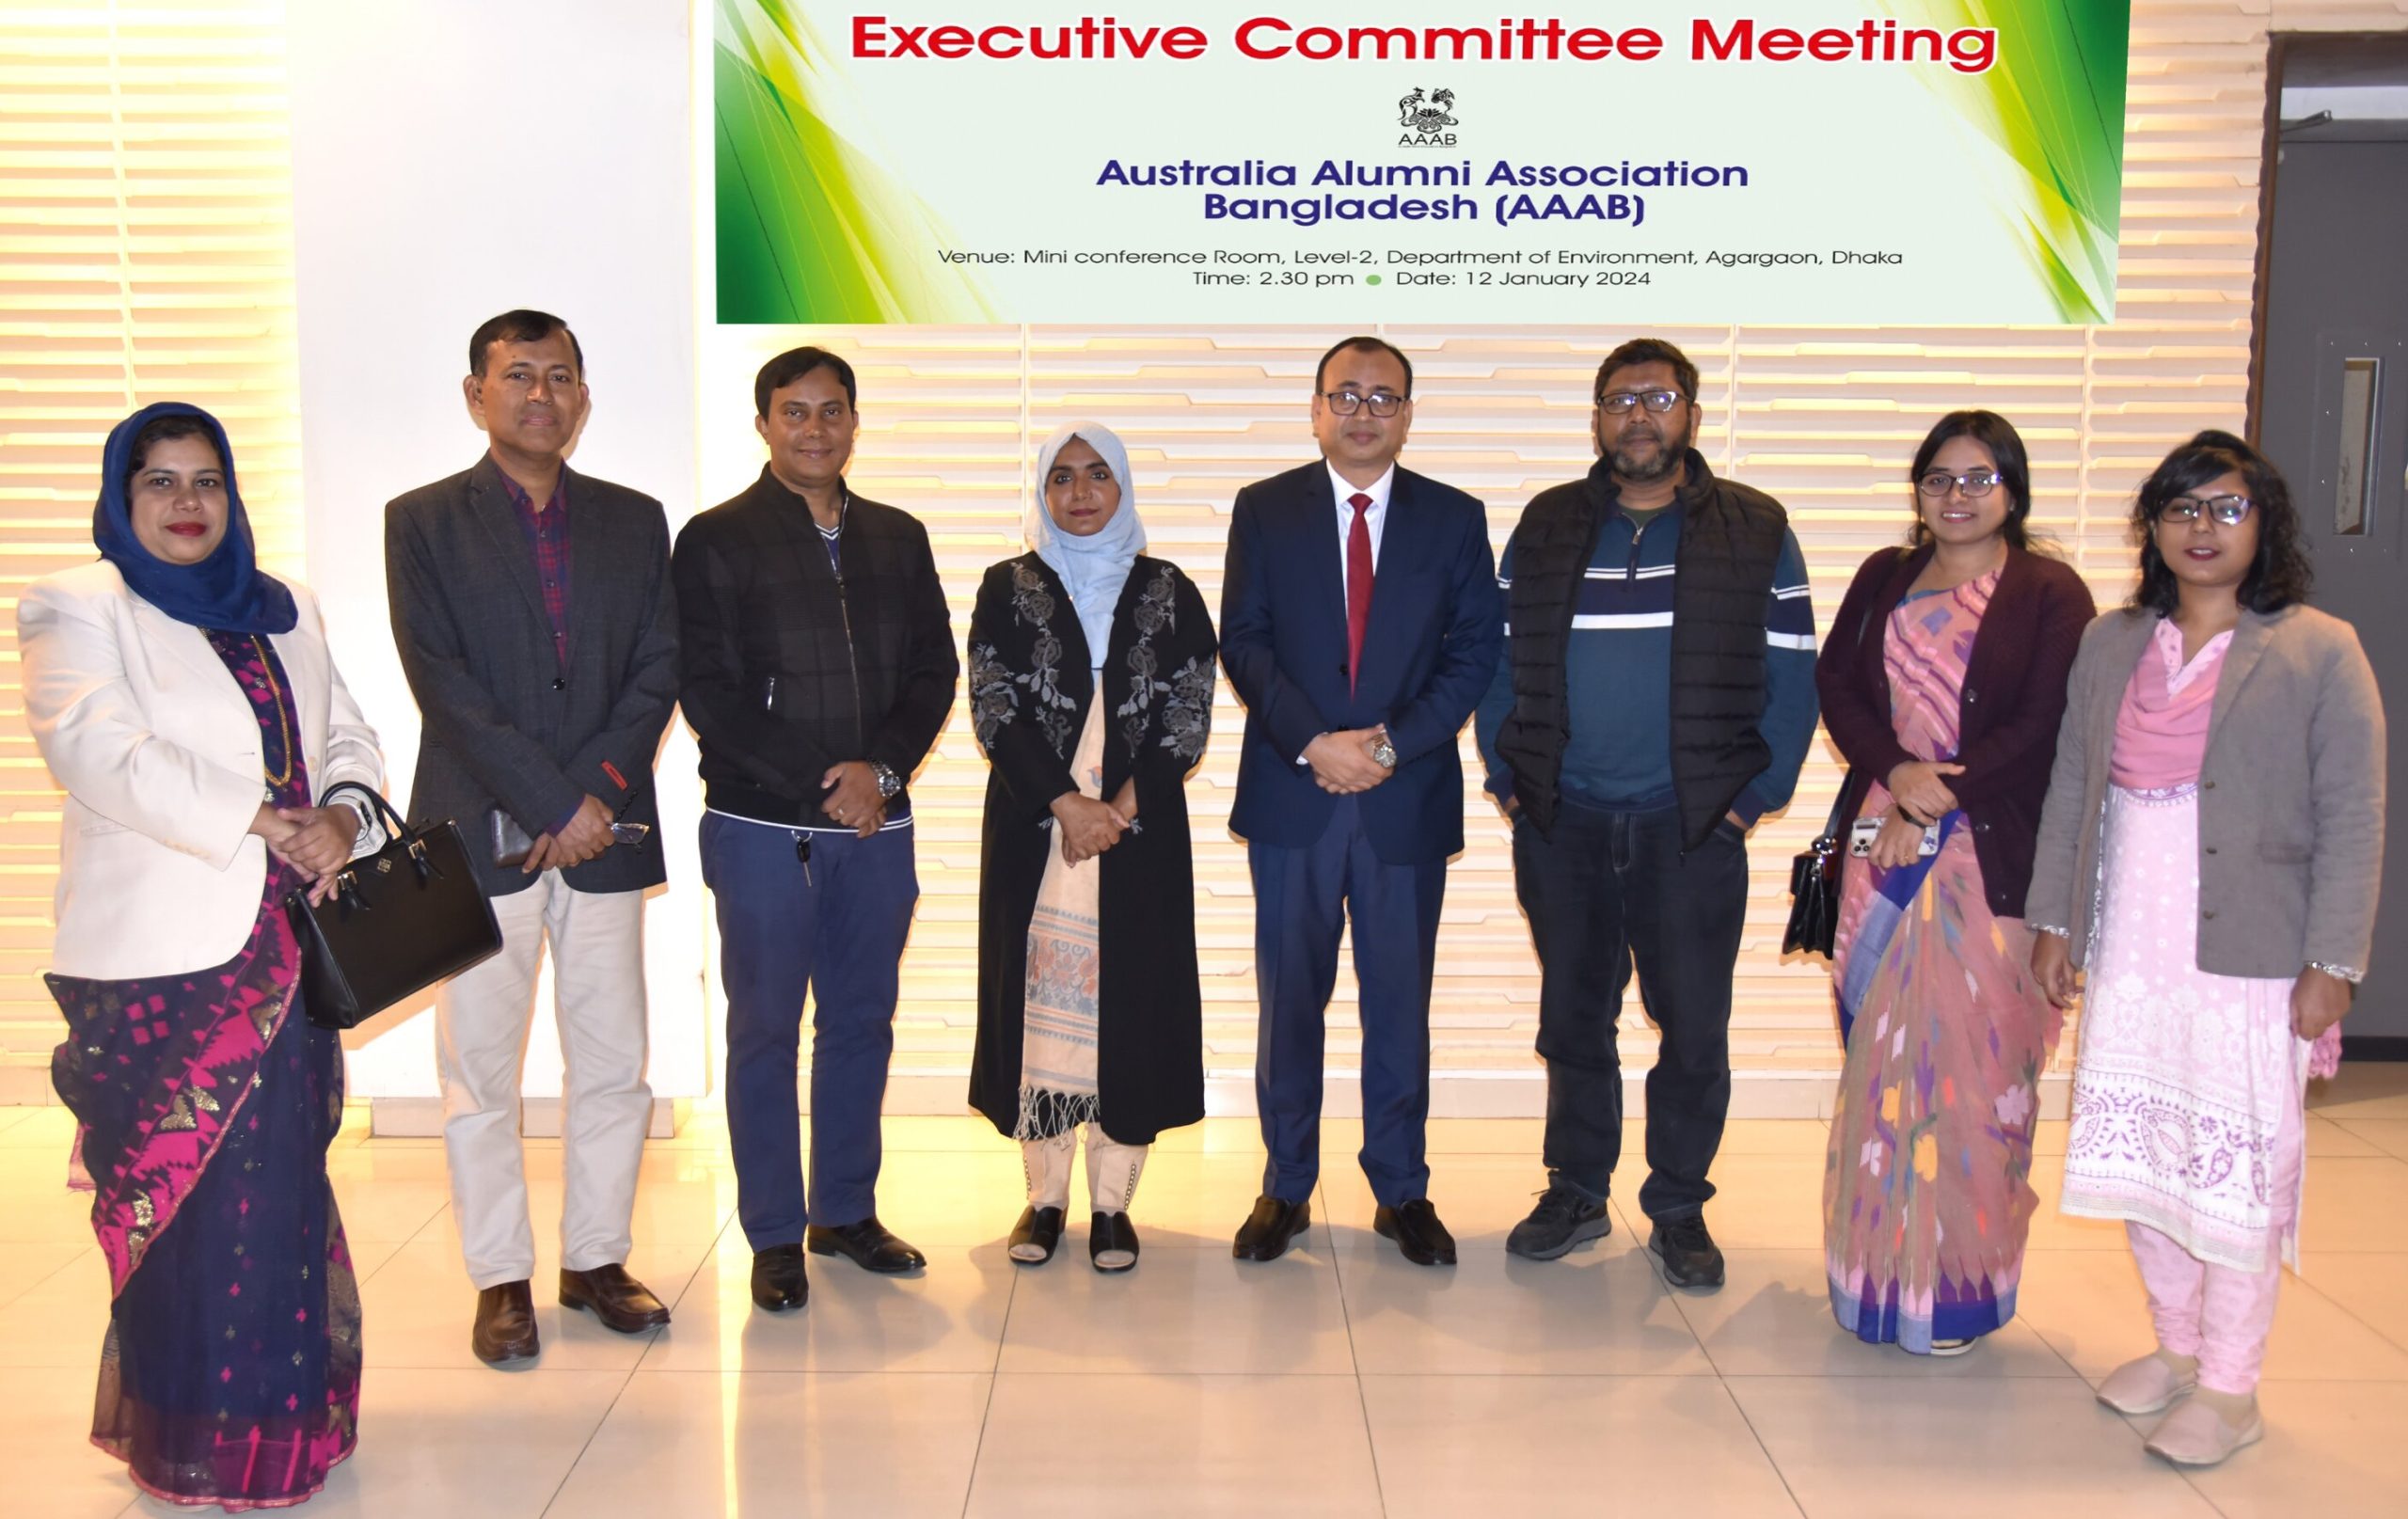 2019-21 Executive Committee Election